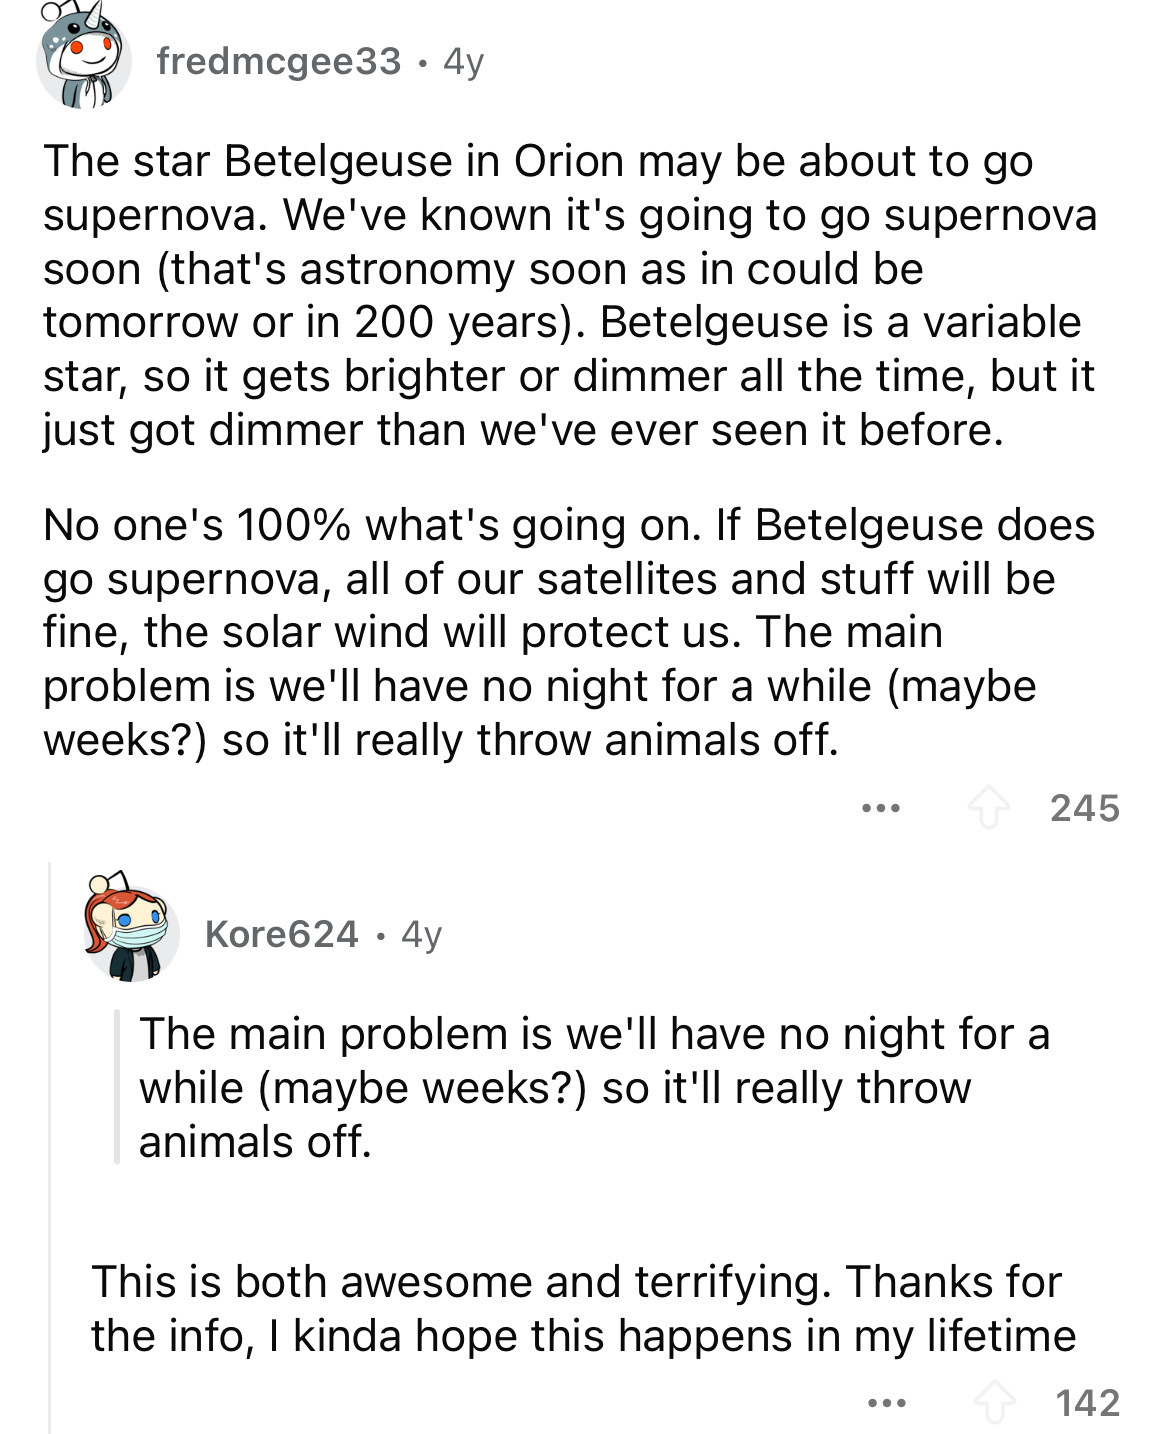 document - fredmcgee33.4y The star Betelgeuse in Orion may be about to go supernova. We've known it's going to go supernova soon that's astronomy soon as in could be tomorrow or in 200 years. Betelgeuse is a variable star, so it gets brighter or dimmer al